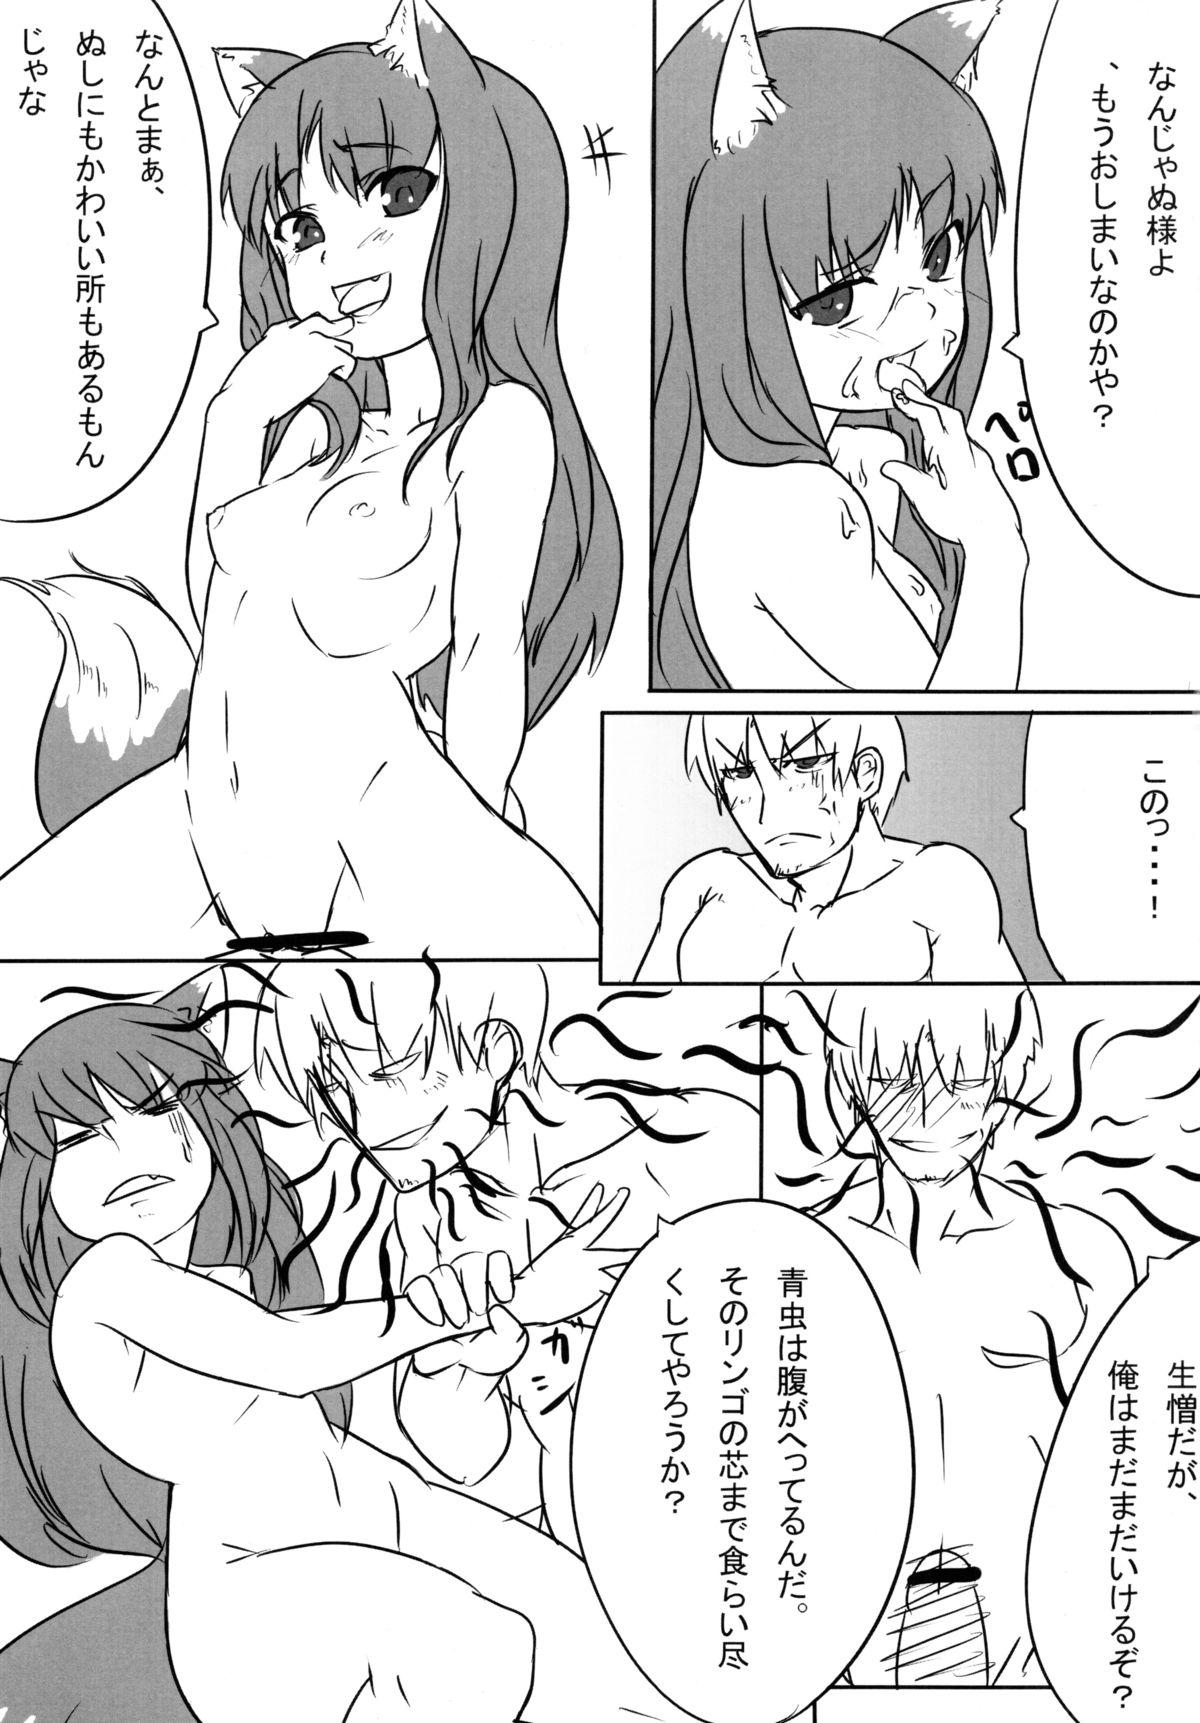 Mother fuck Ookamito Koushinryou IIKB - Spice and wolf Fucking - Page 11